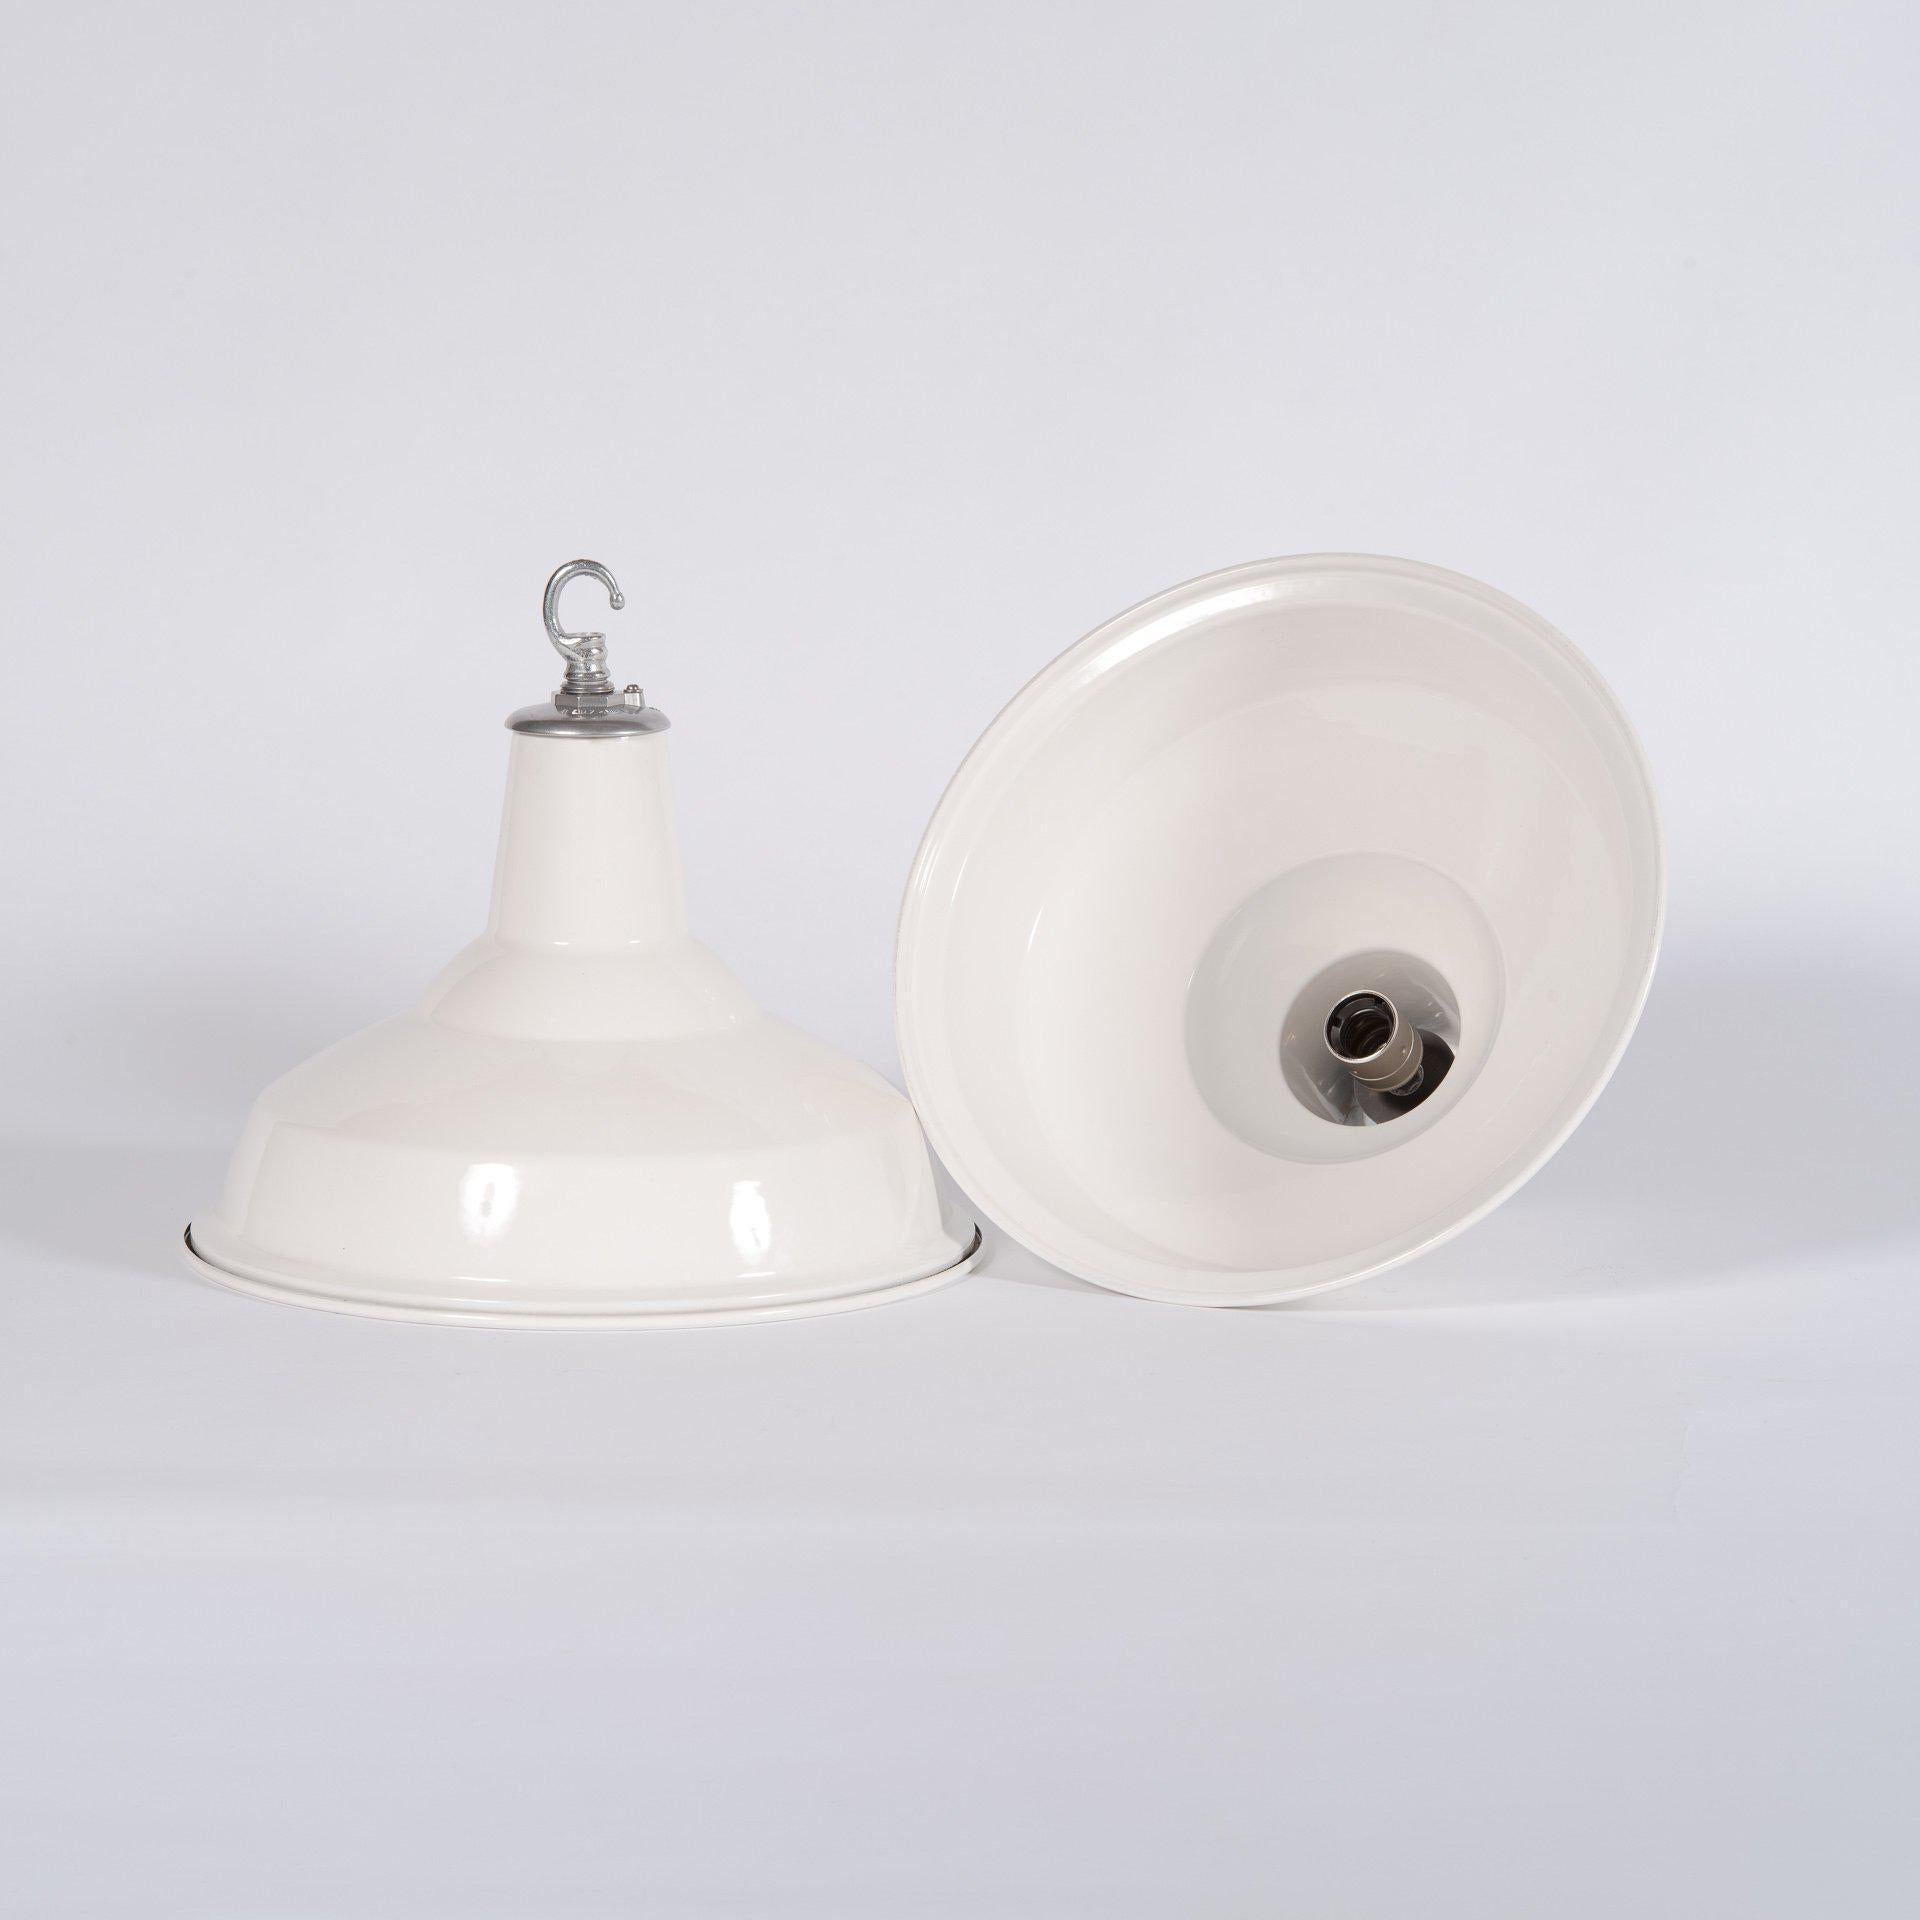 A huge run of 80 white enamel industrial pendant lights salvaged from a London Hospital plant room.

Manufactured by English firm The Benjamin Electric Limited circa 1950.

The shades are in exceptional condition in rarely seen white and in the